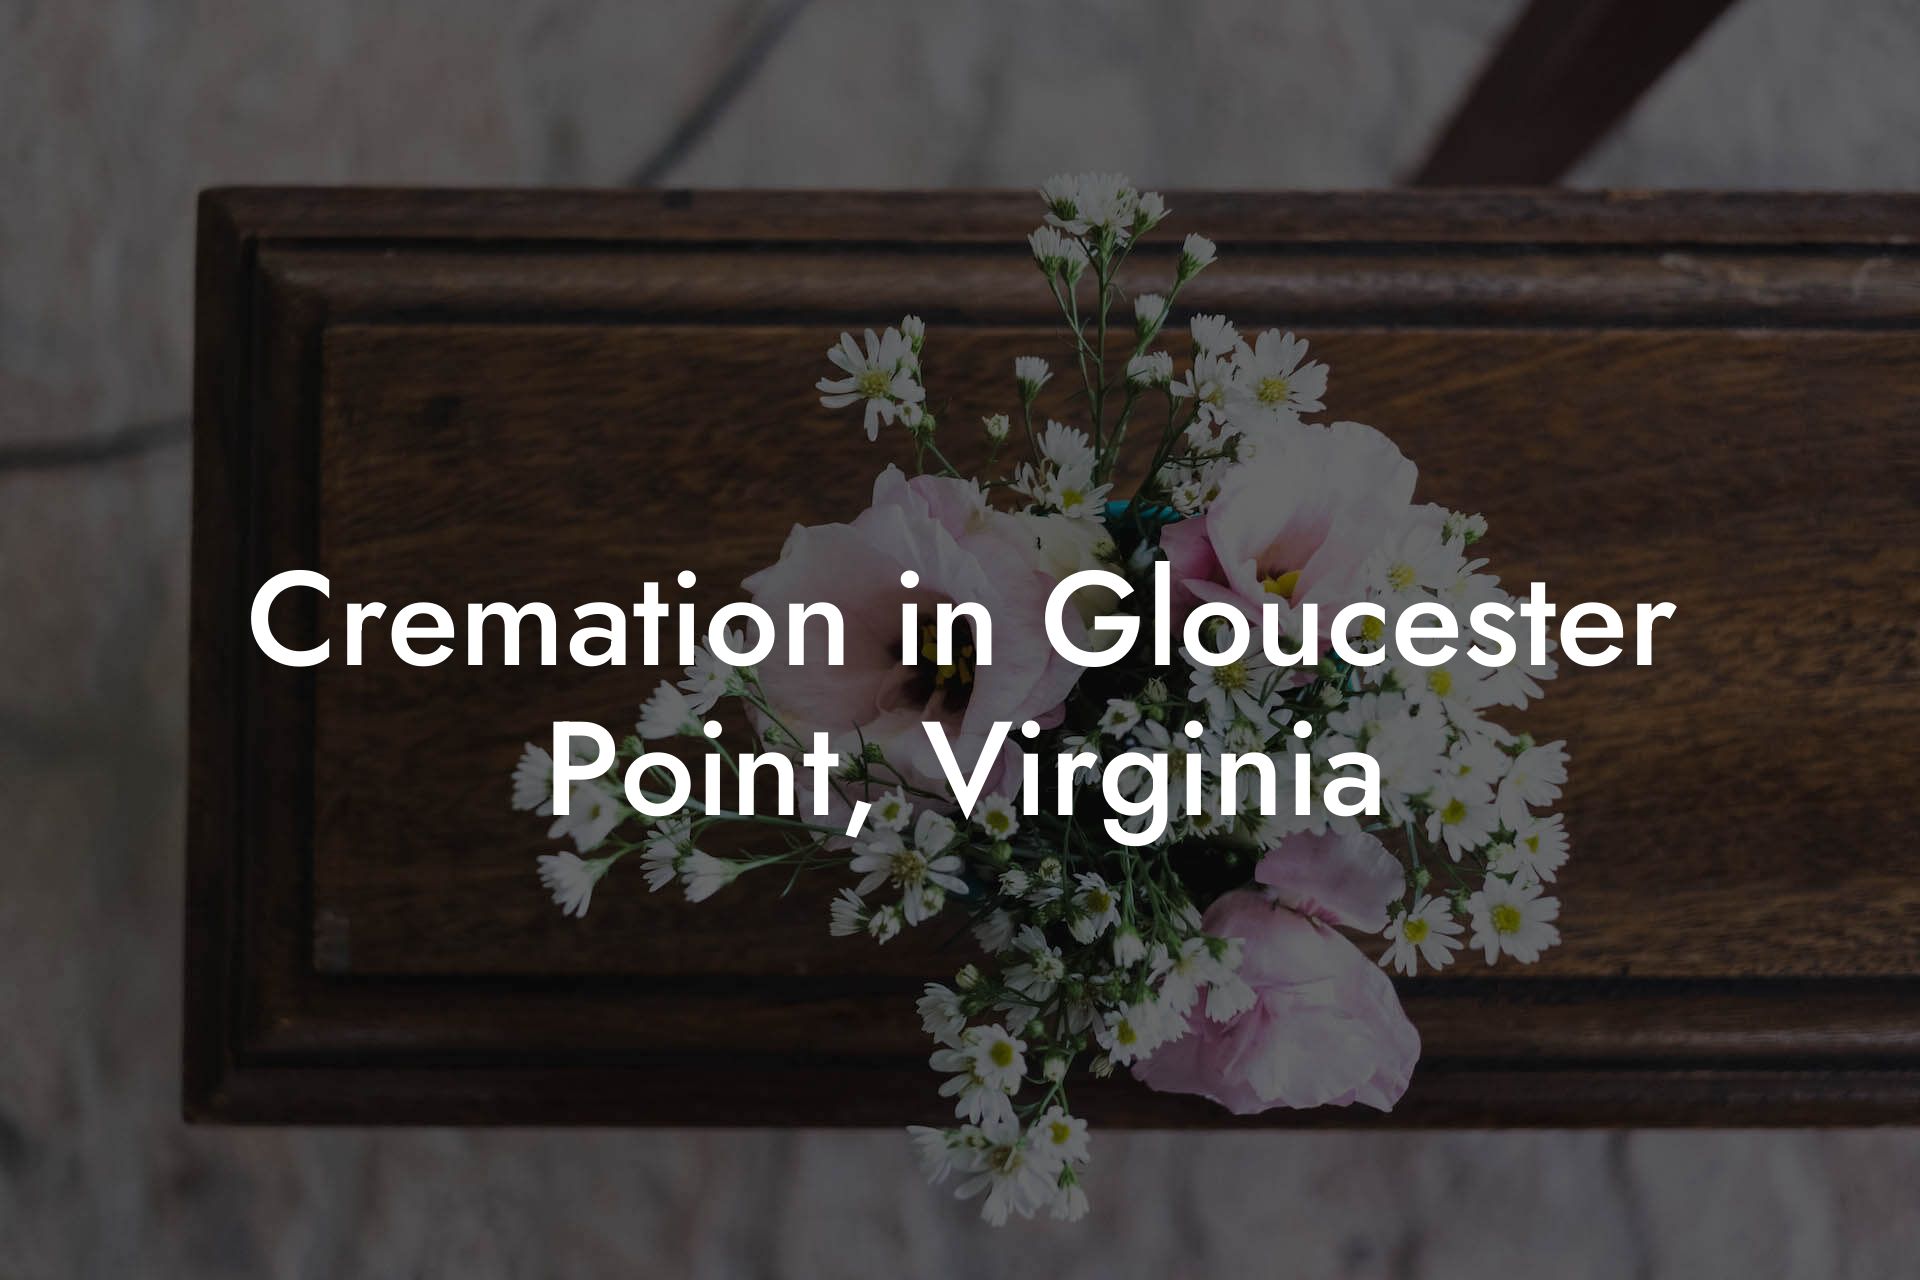 Cremation in Gloucester Point, Virginia